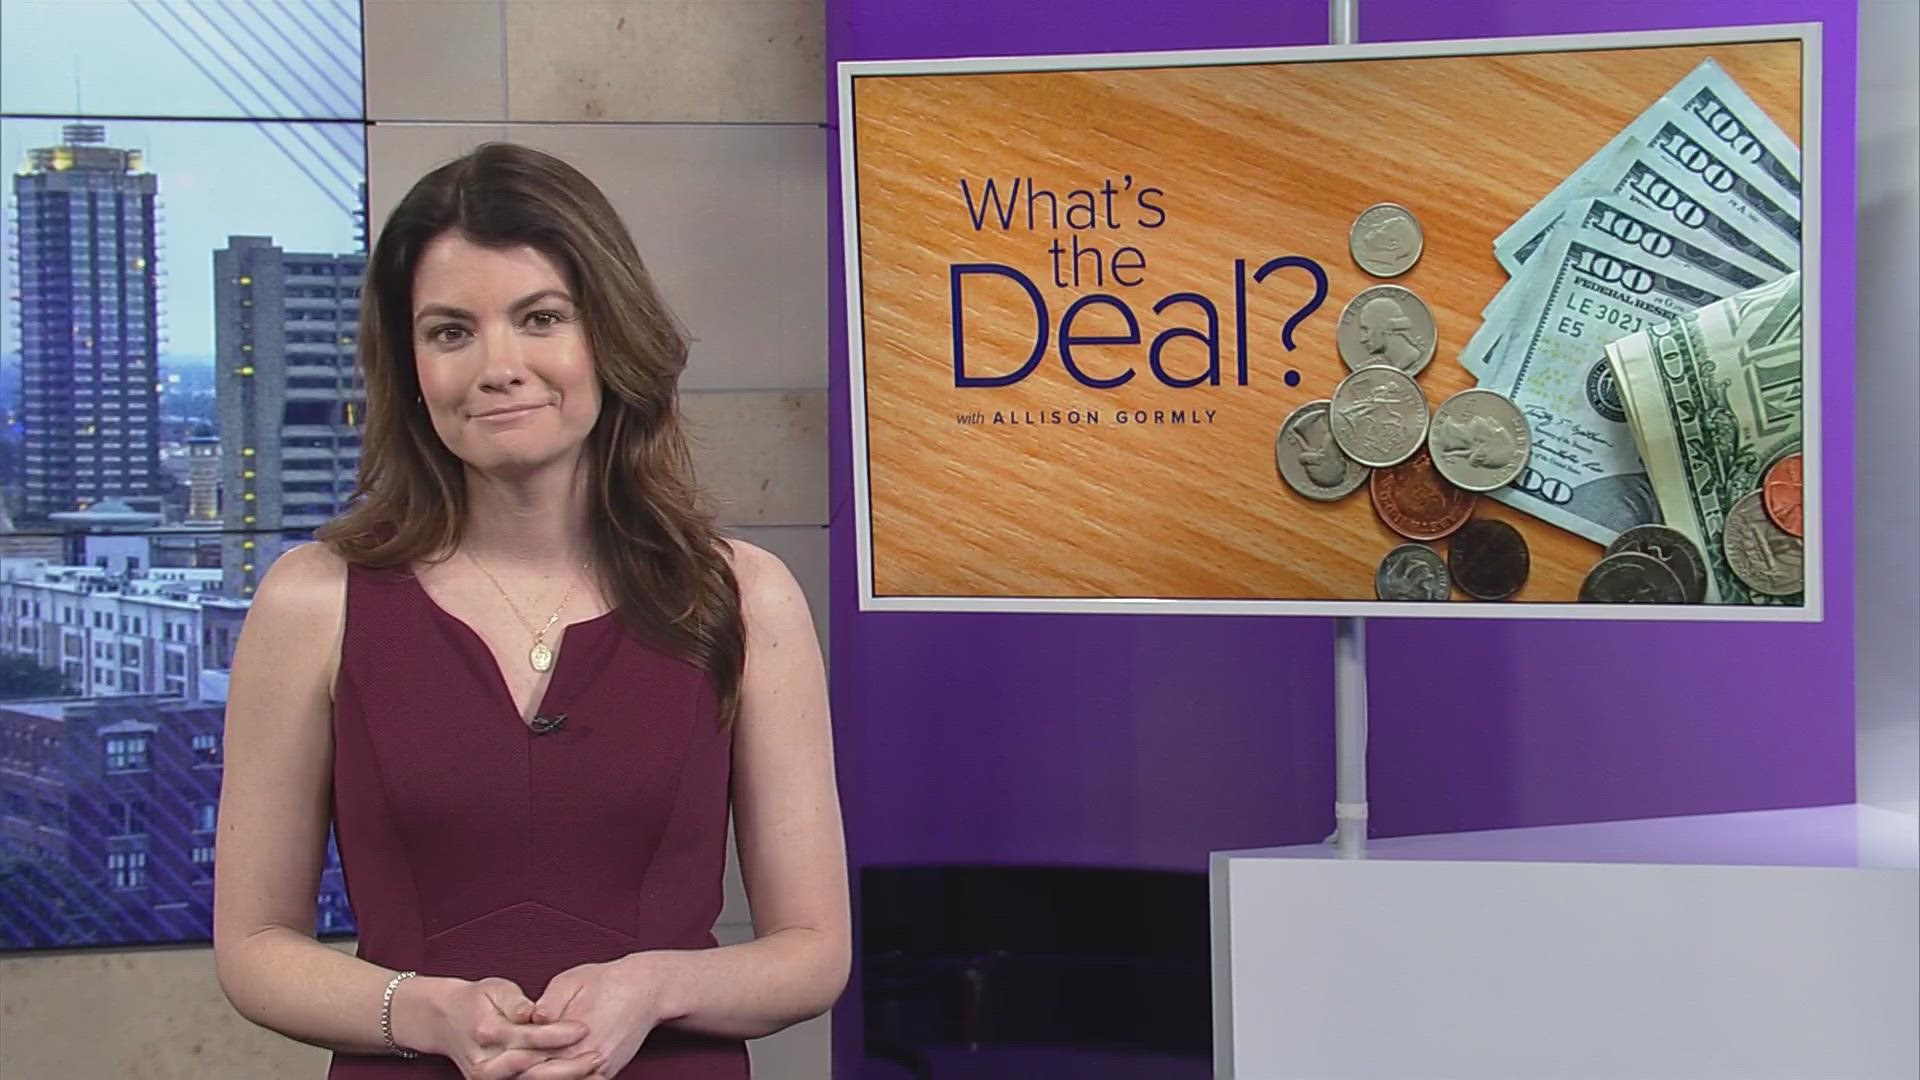 Allison Gormly tells us what not to buy in What's the Deal.